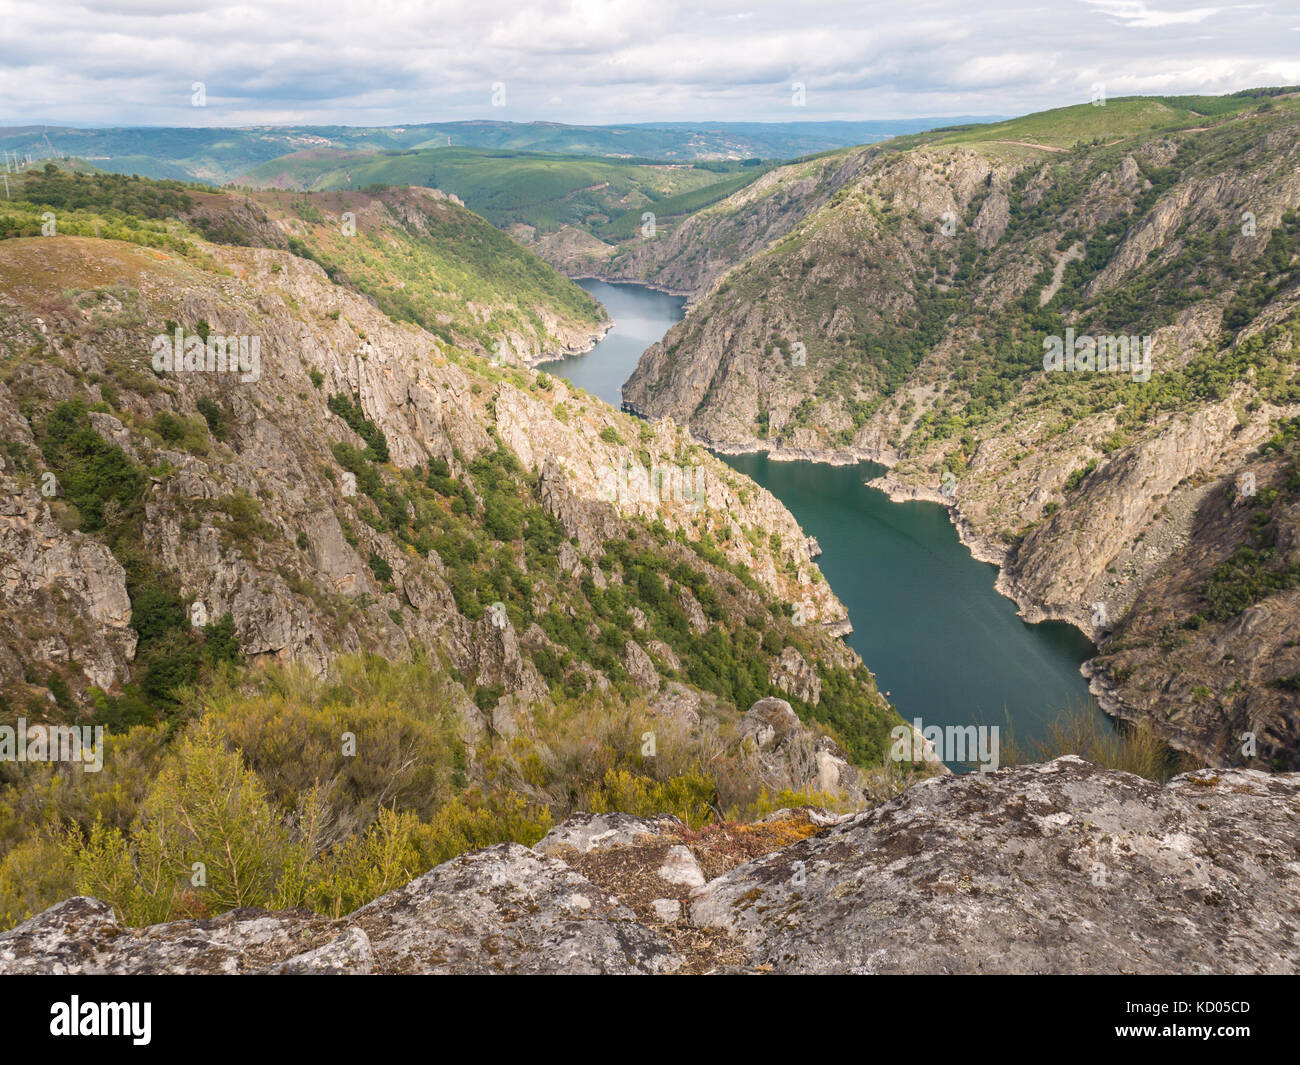 Canyon of Sil river in the province of Ourense, Galicia, Spain. Ribeira Sacra deep canyon landscape view from Vilouxe viewpoint. Stock Photo